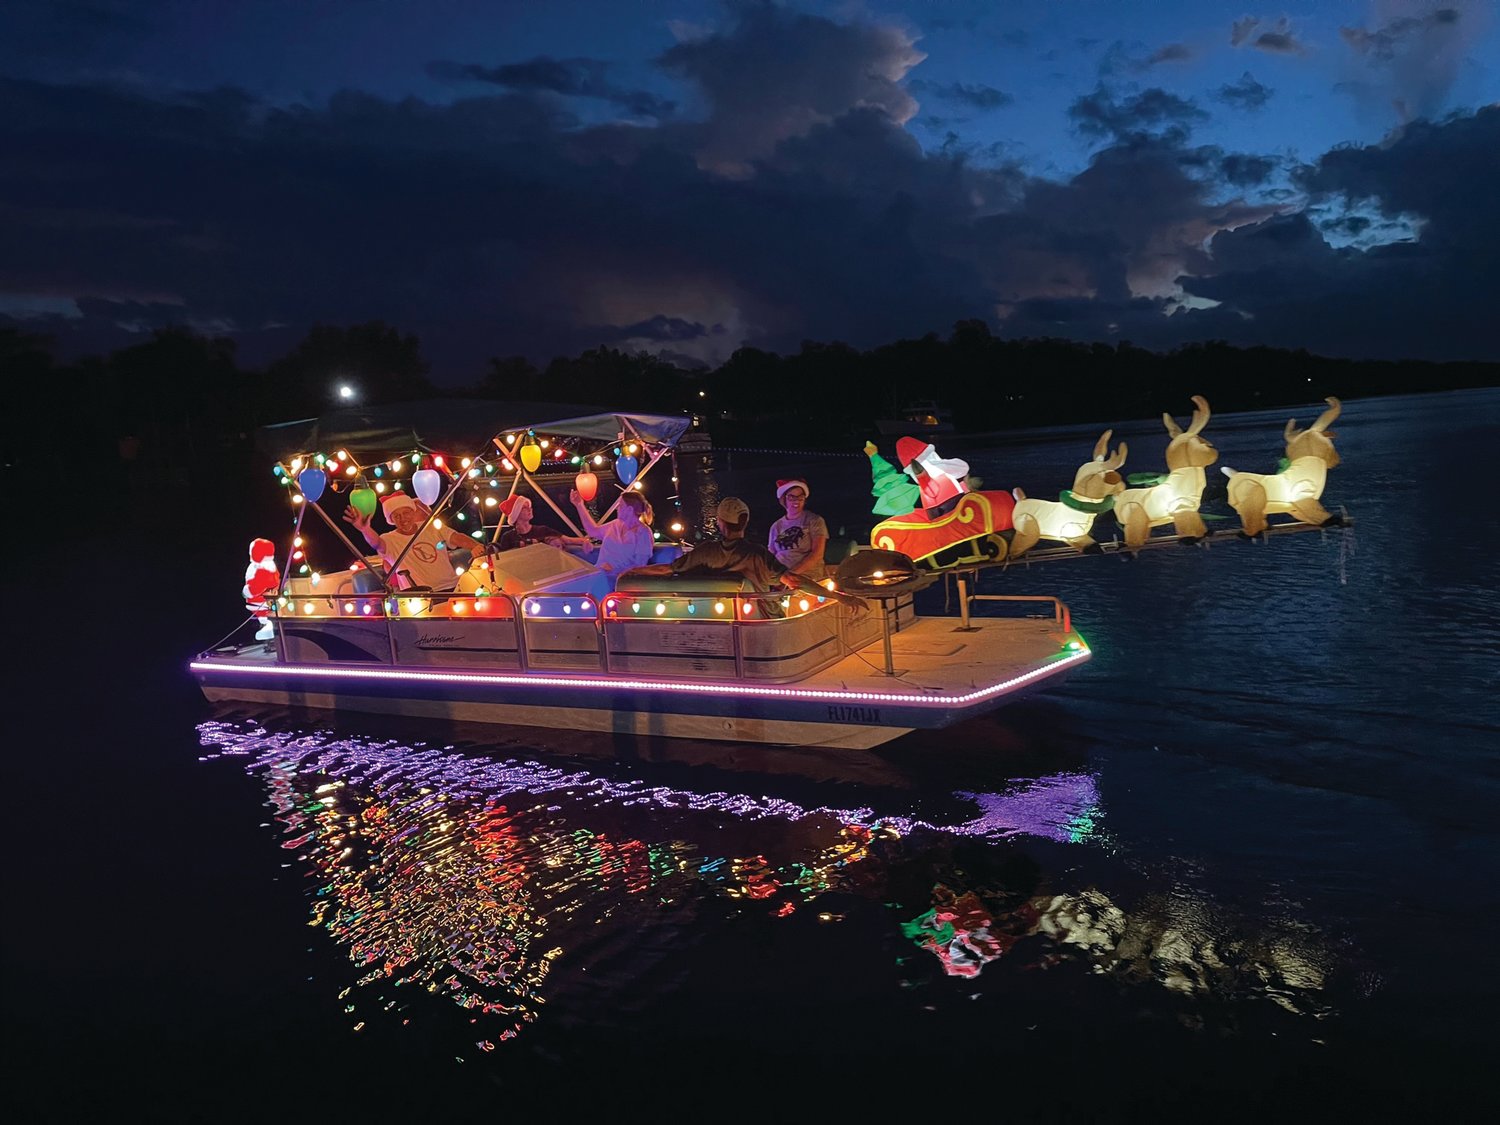 LABELLE – Holiday music and shouts of “Merry Christmas!” could be heard on shore at the boats passed. [Photo courtesy of East Coast Marine]